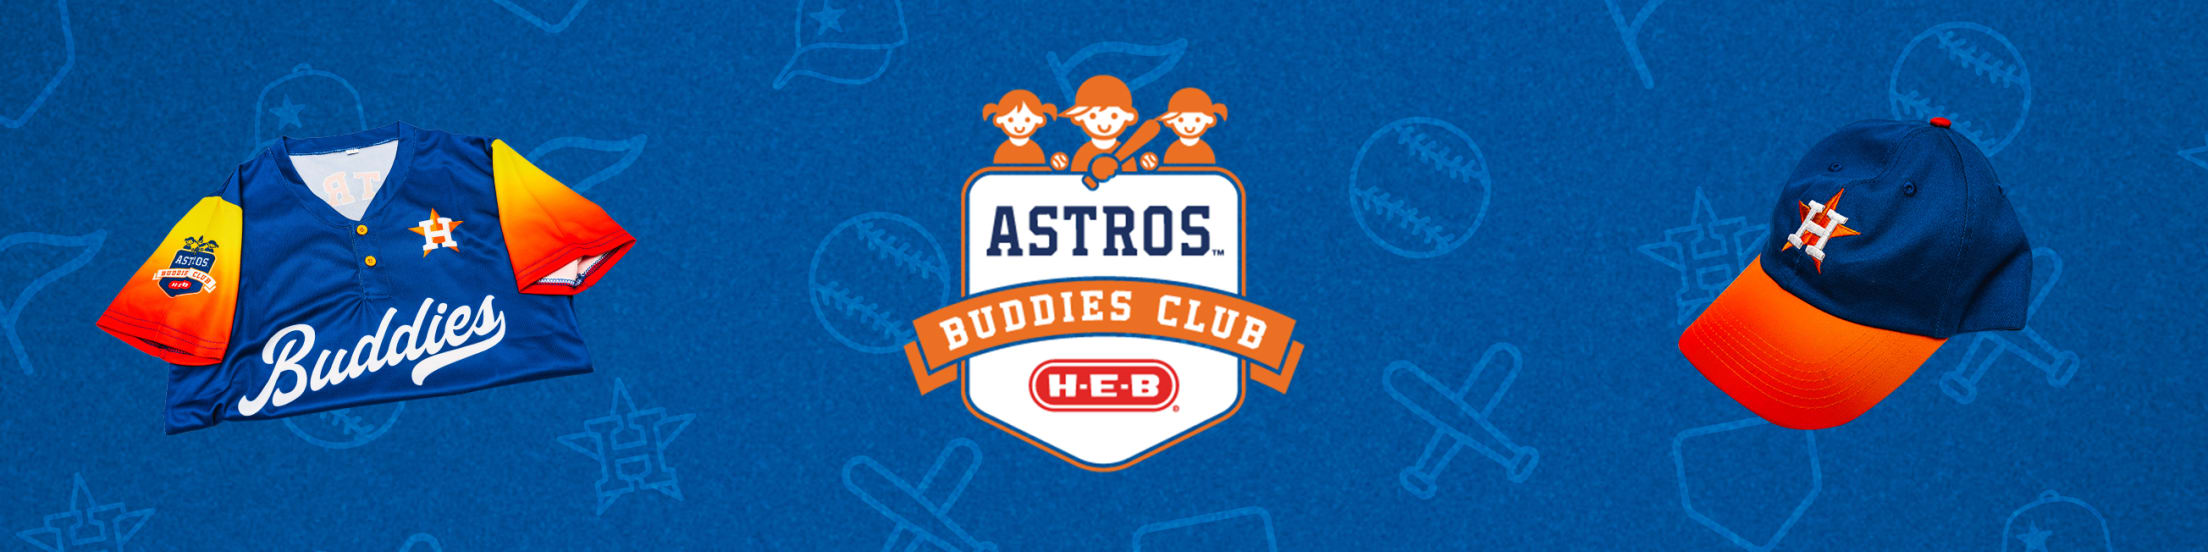 Houston Astros on X: For just $30, children 12 and under can join the 2022  Astros Buddies Club, presented by @HEB. This is the coolest way to show  your Astros pride. Buddies